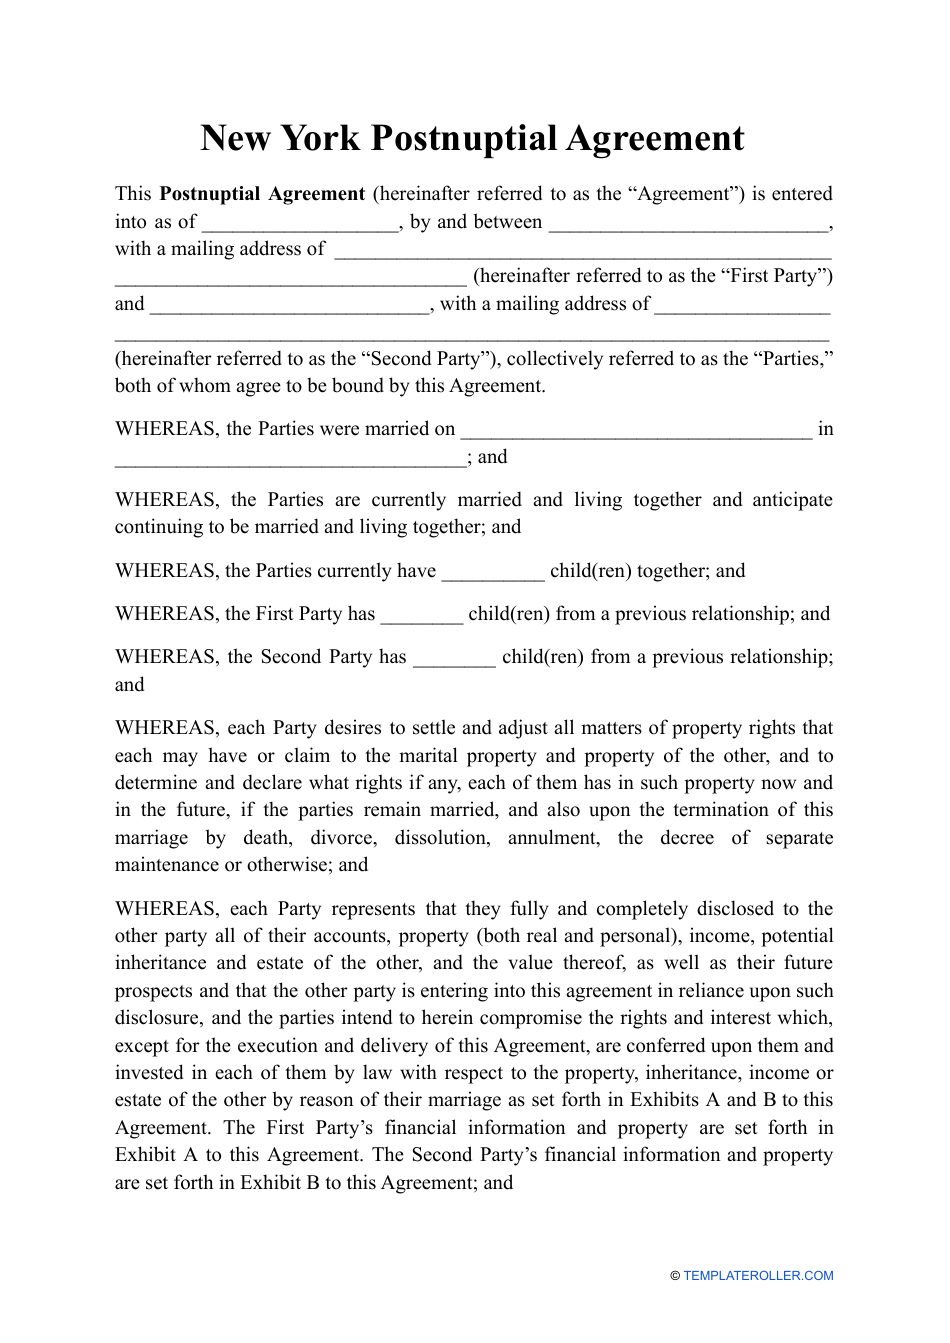 Postnuptial Agreement Template - New York, Page 1